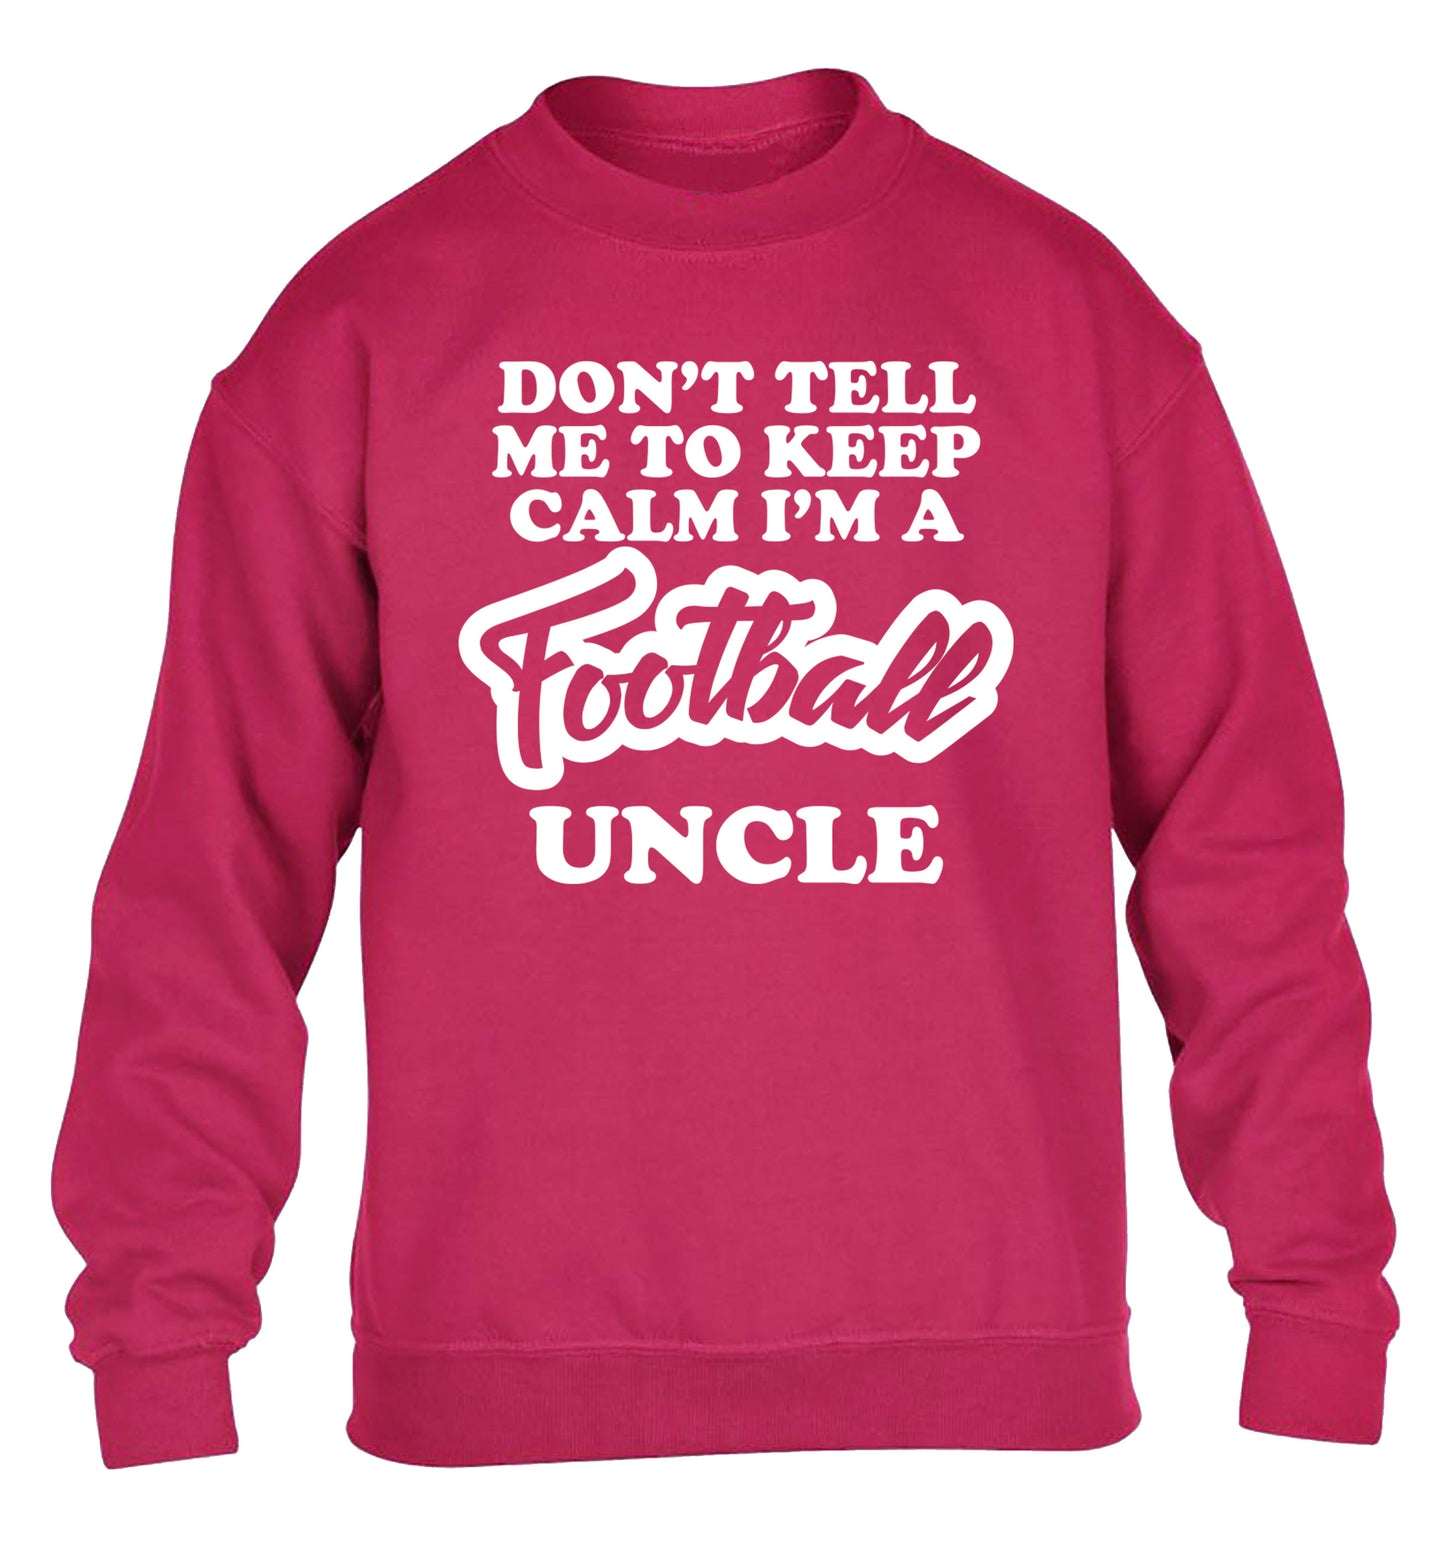 Don't tell me to keep calm I'm a football uncle children's pink sweater 12-14 Years